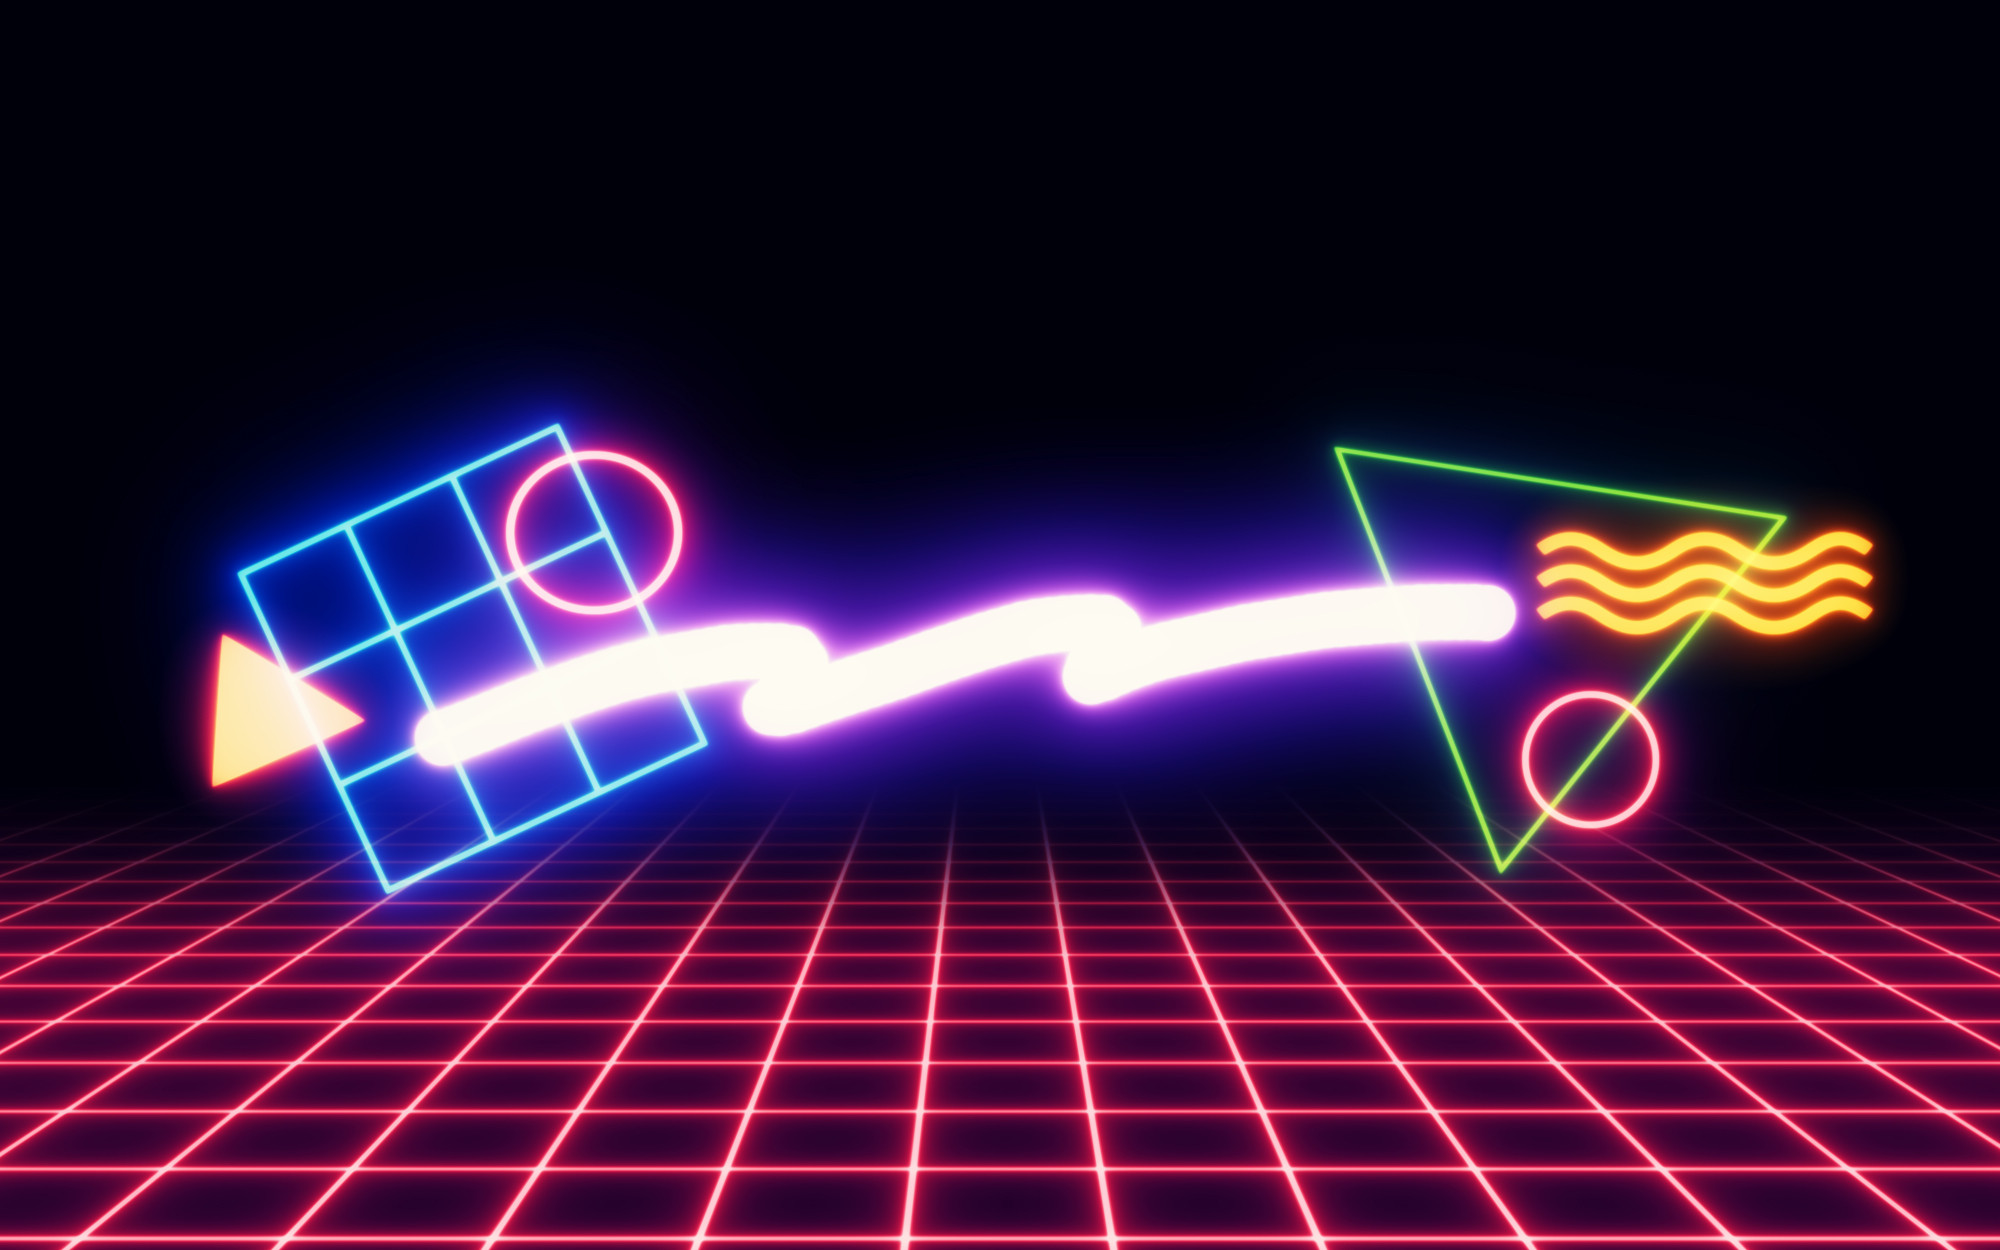 80s Neon Shapes / Wallpapers on Behance